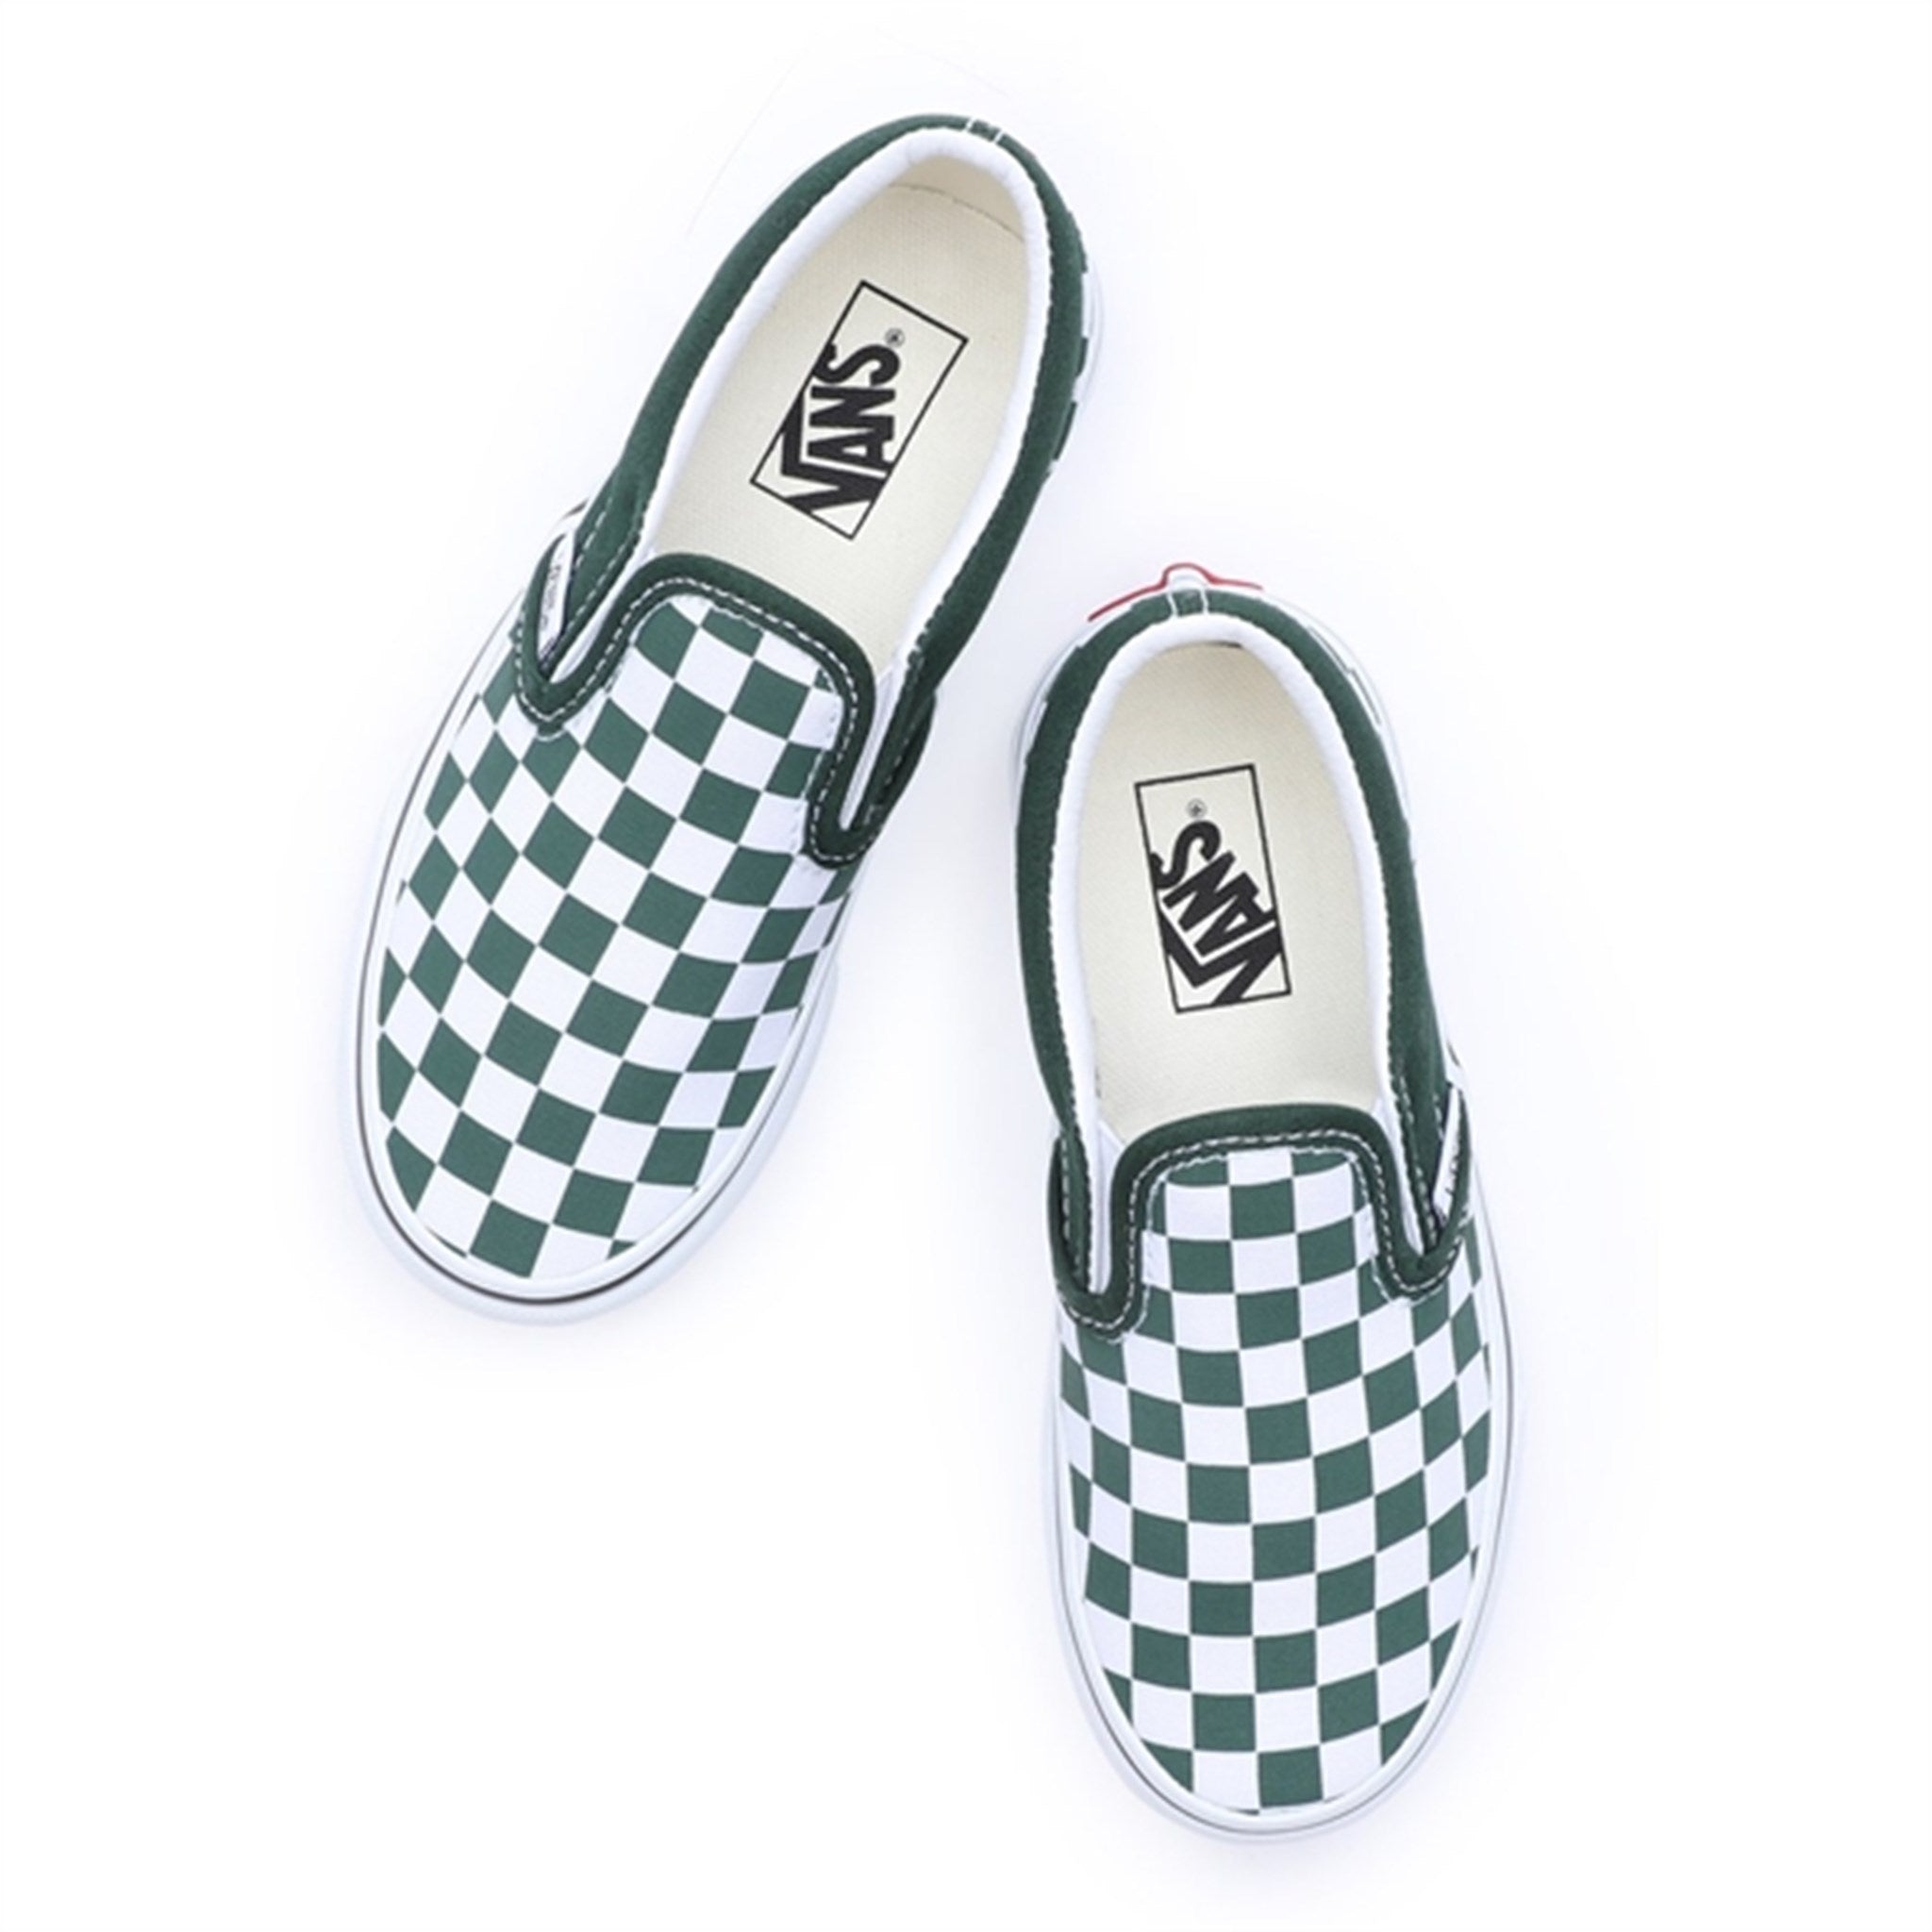 VANS Uy Classic Slip-On Color Theory Checkerboard Mountain View Sneakers